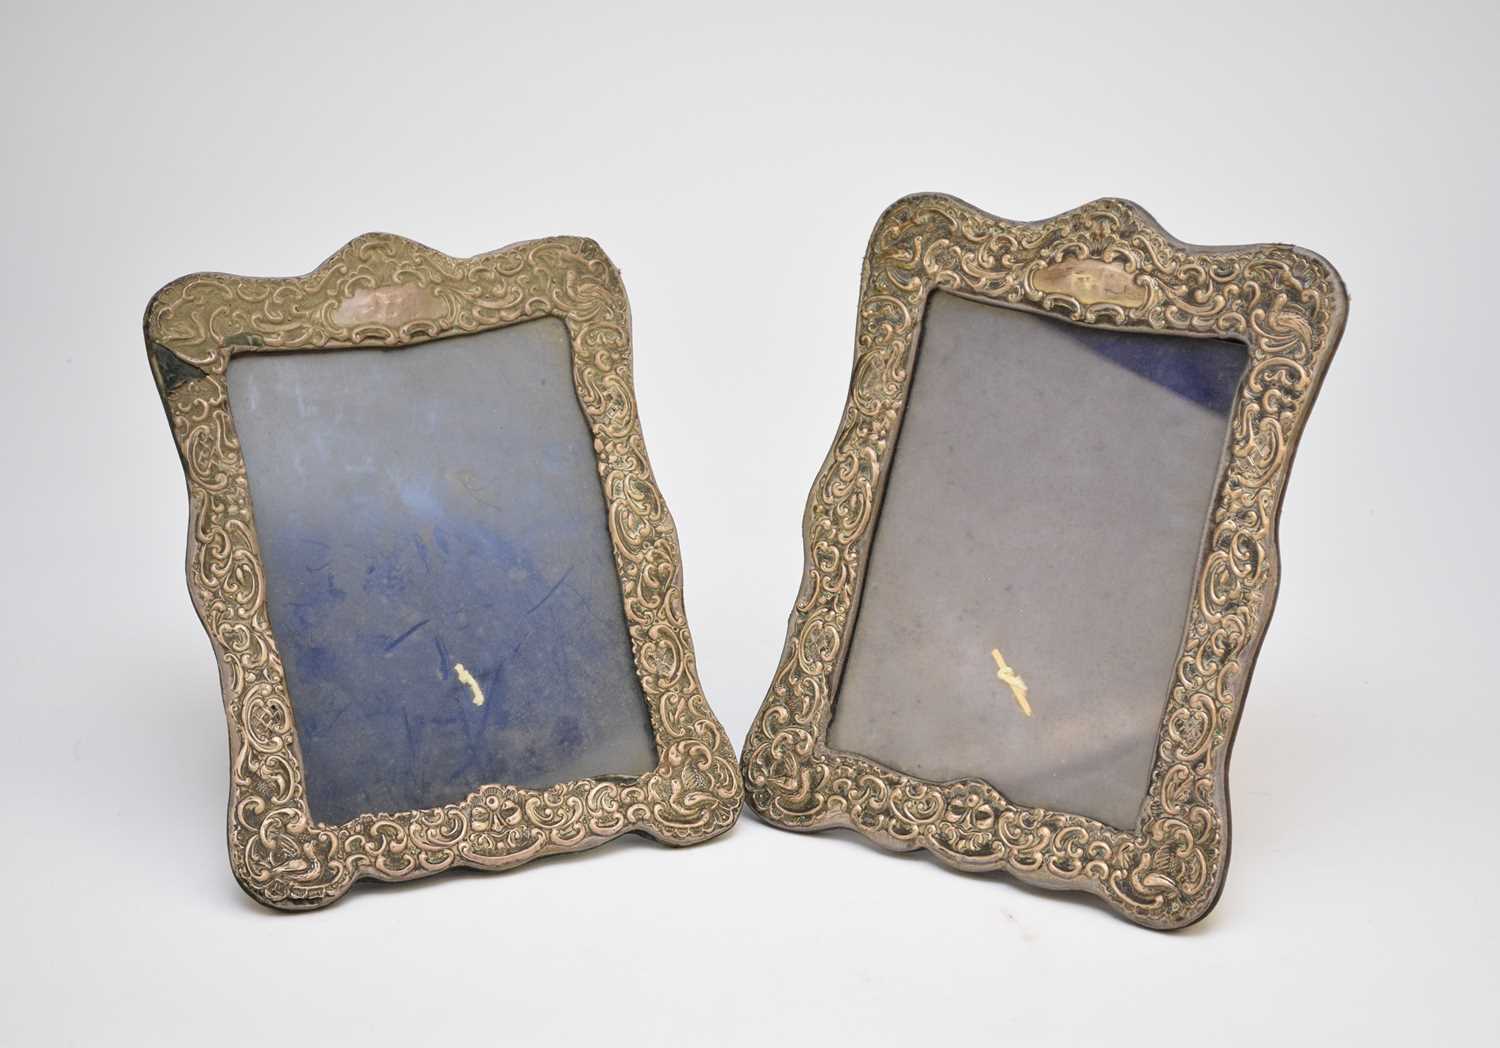 A pair of Edwardian silver photograph frames